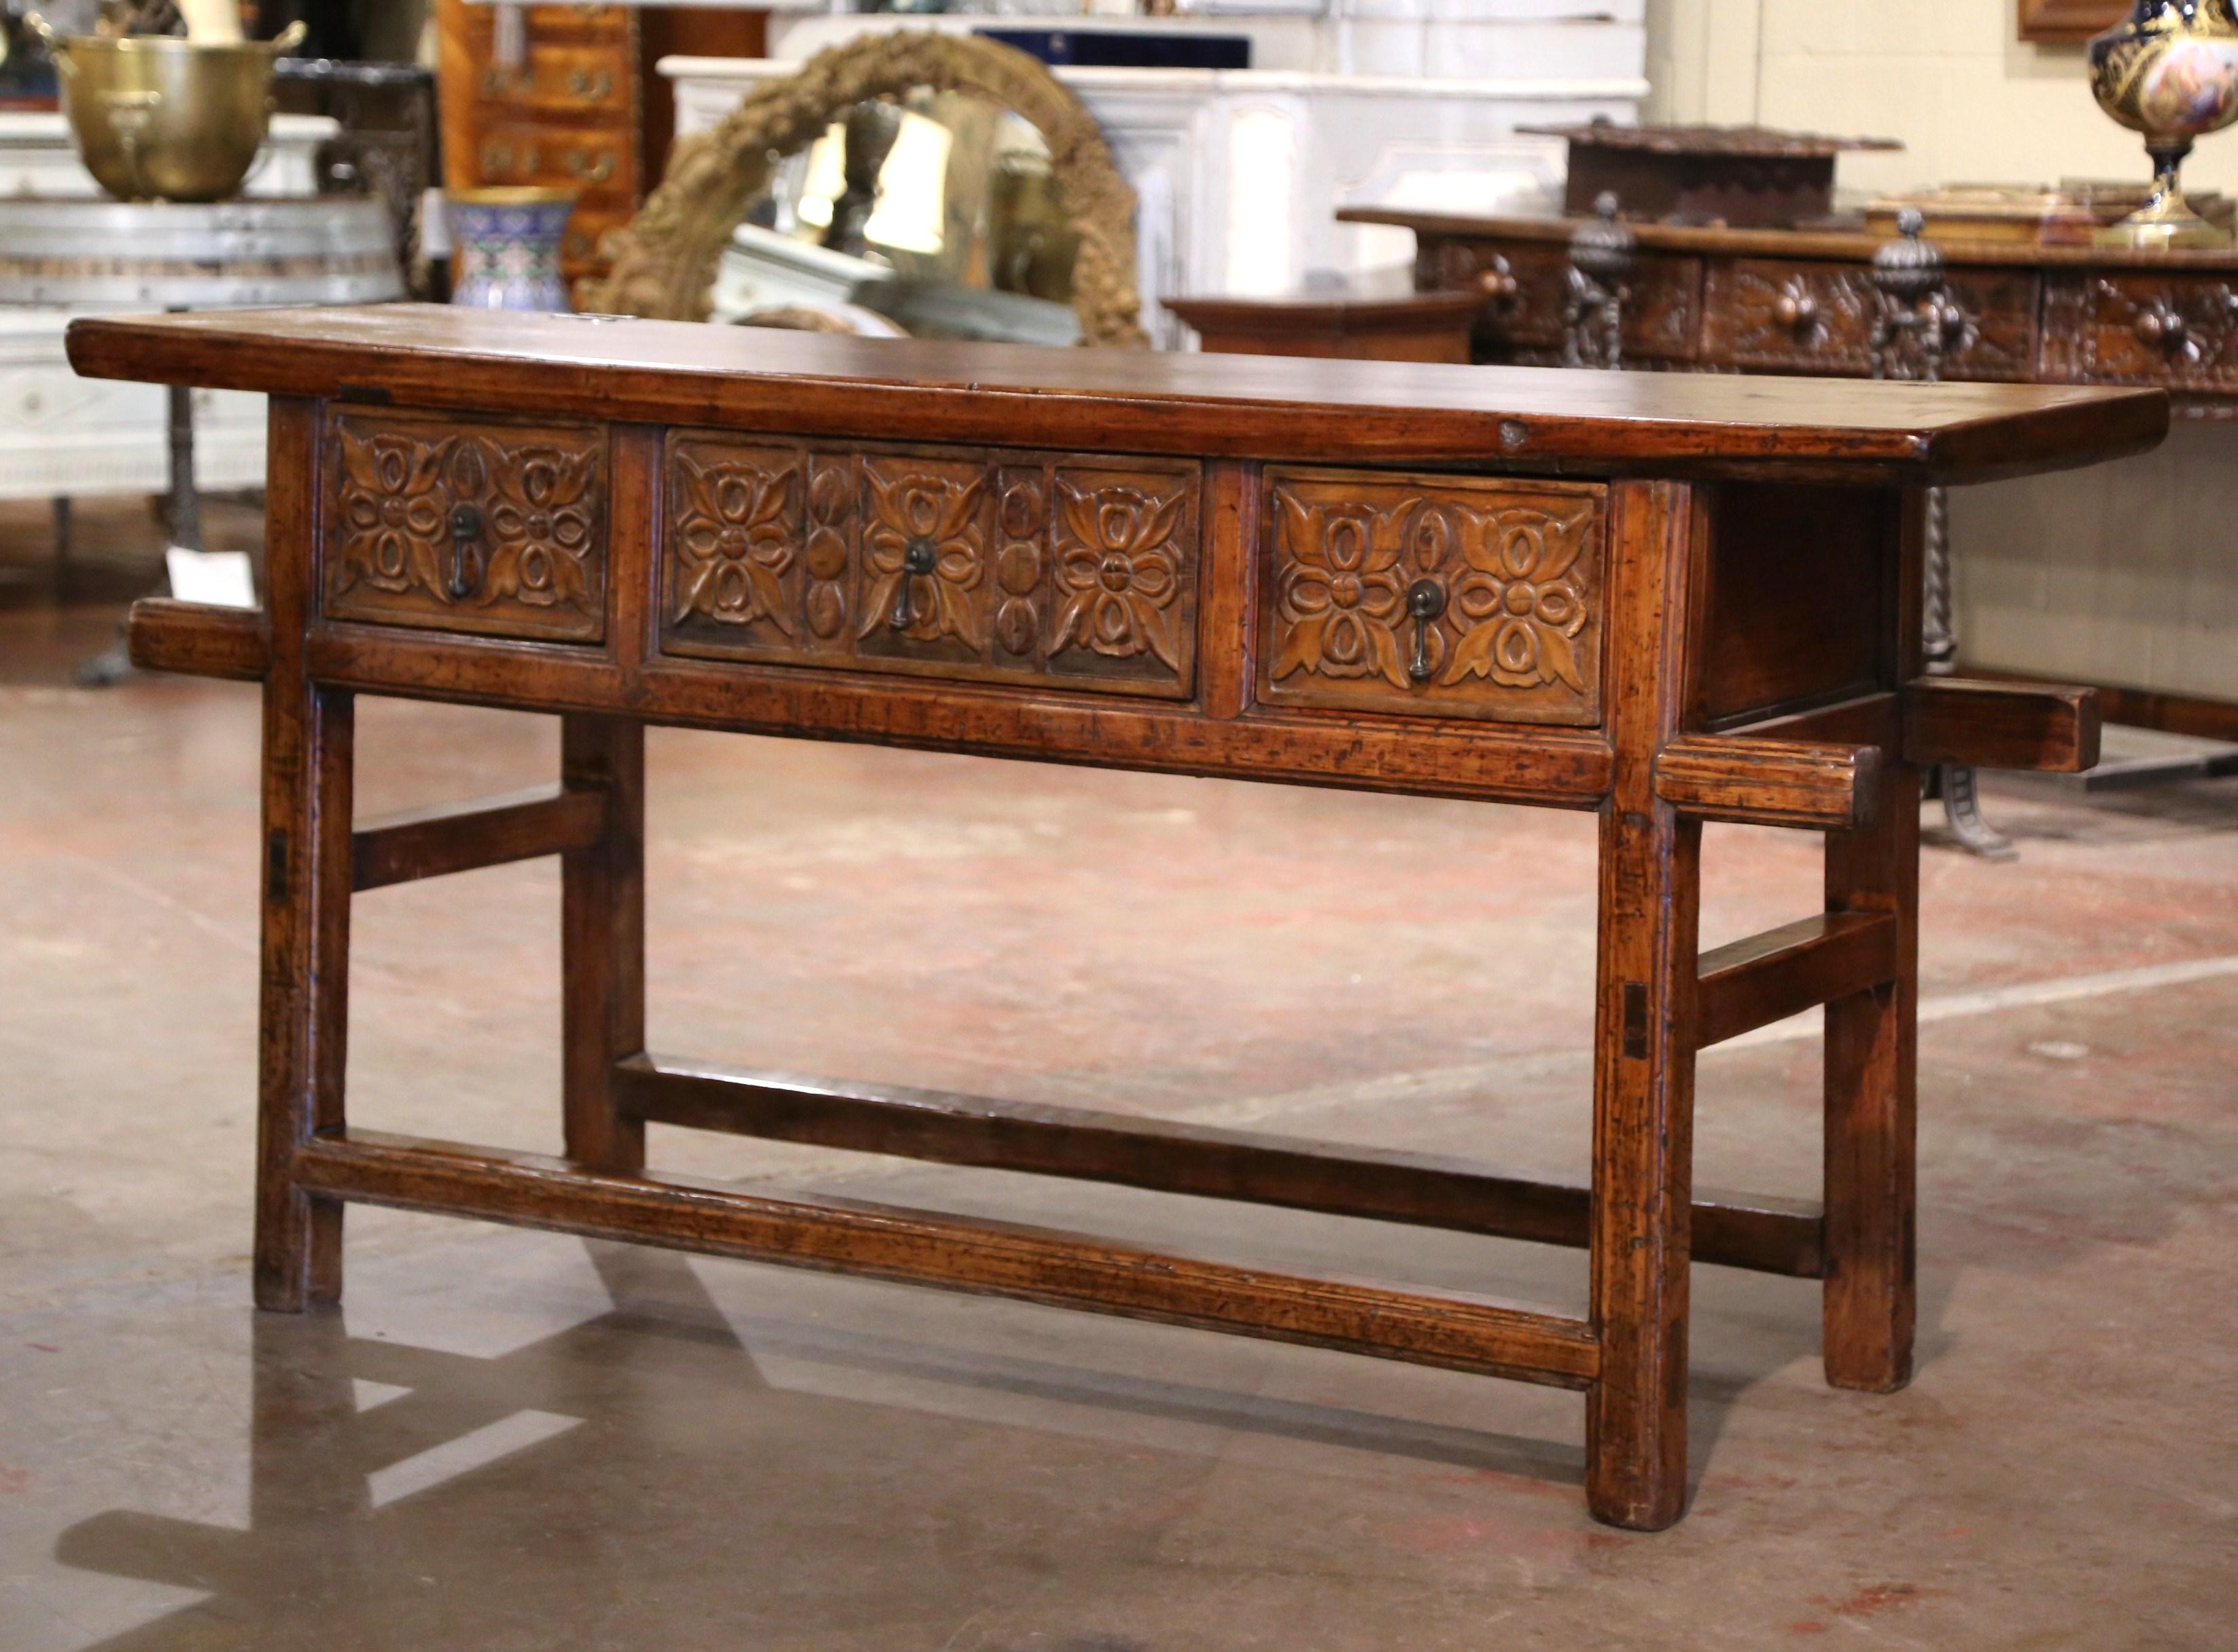 Place this elegant antique console table behind a sofa or against a wall. Crafted in Spain circa 1920 and built of oak and pine, the Baroque sofa table sits on square legs connected with a double bottom stretchers; the table features three hand